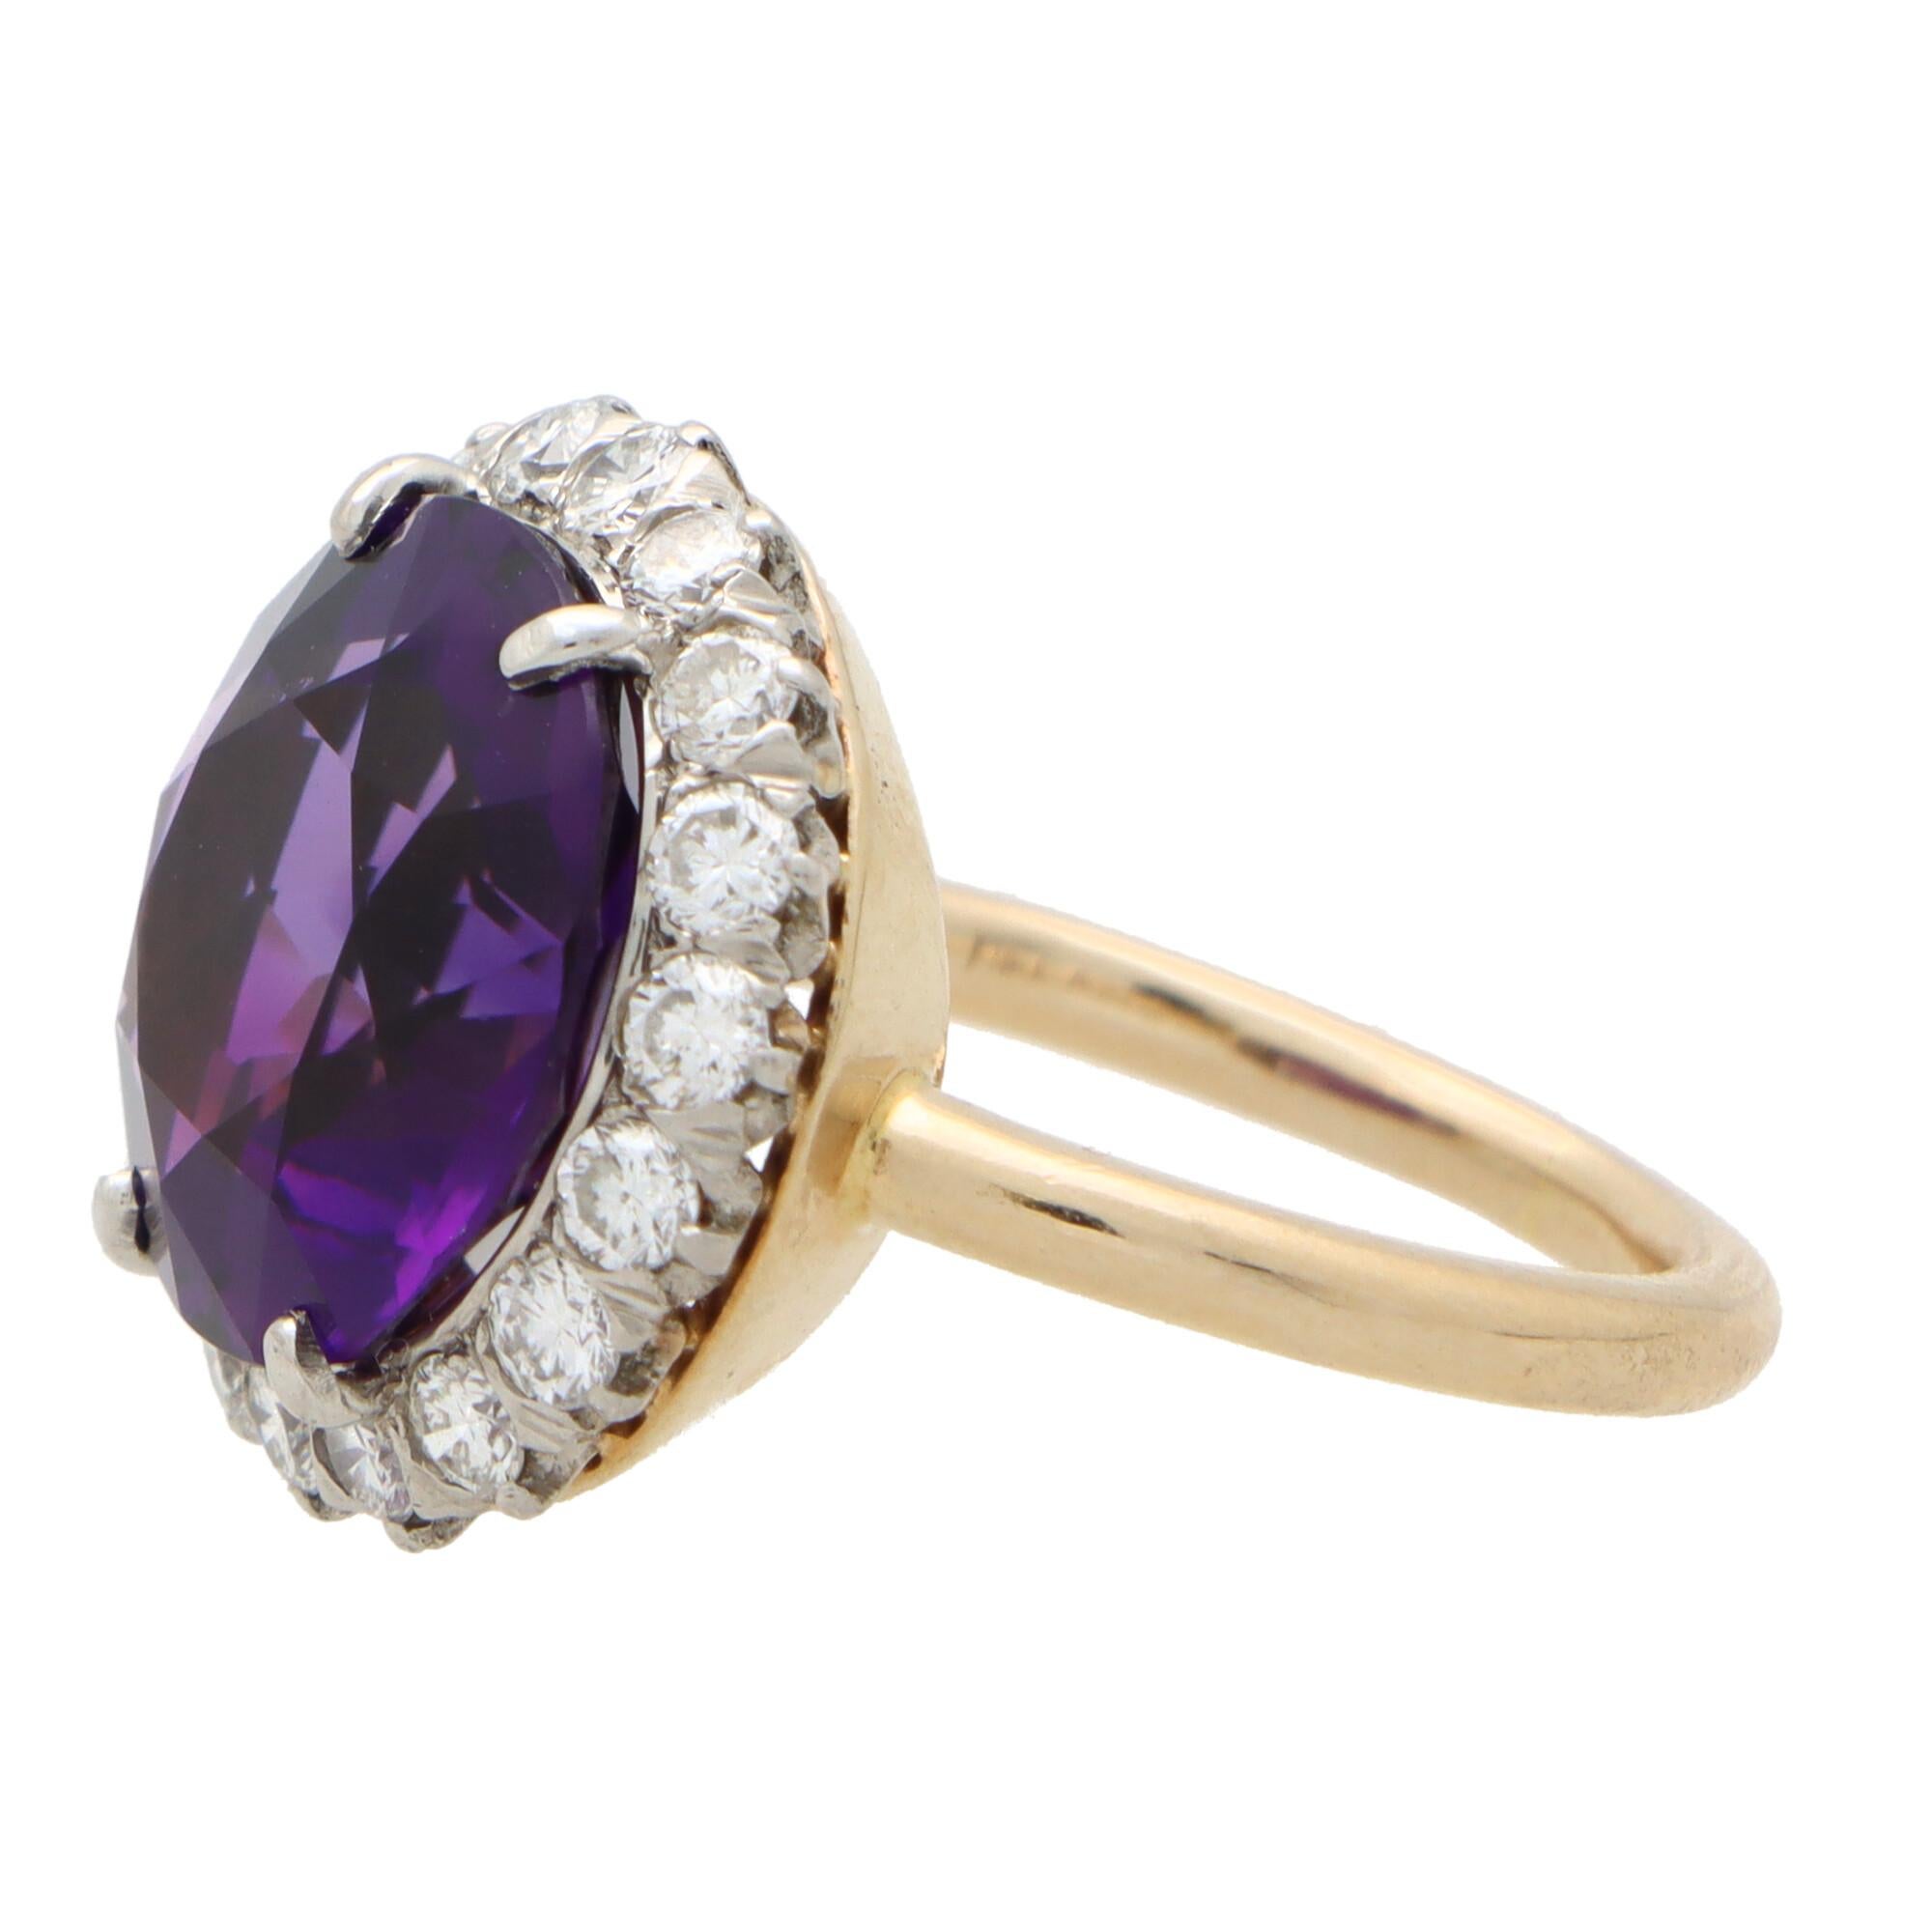 Round Cut Vintage Tiffany & Co. Amethyst and Diamond Cluster Ring Set in 14K Gold